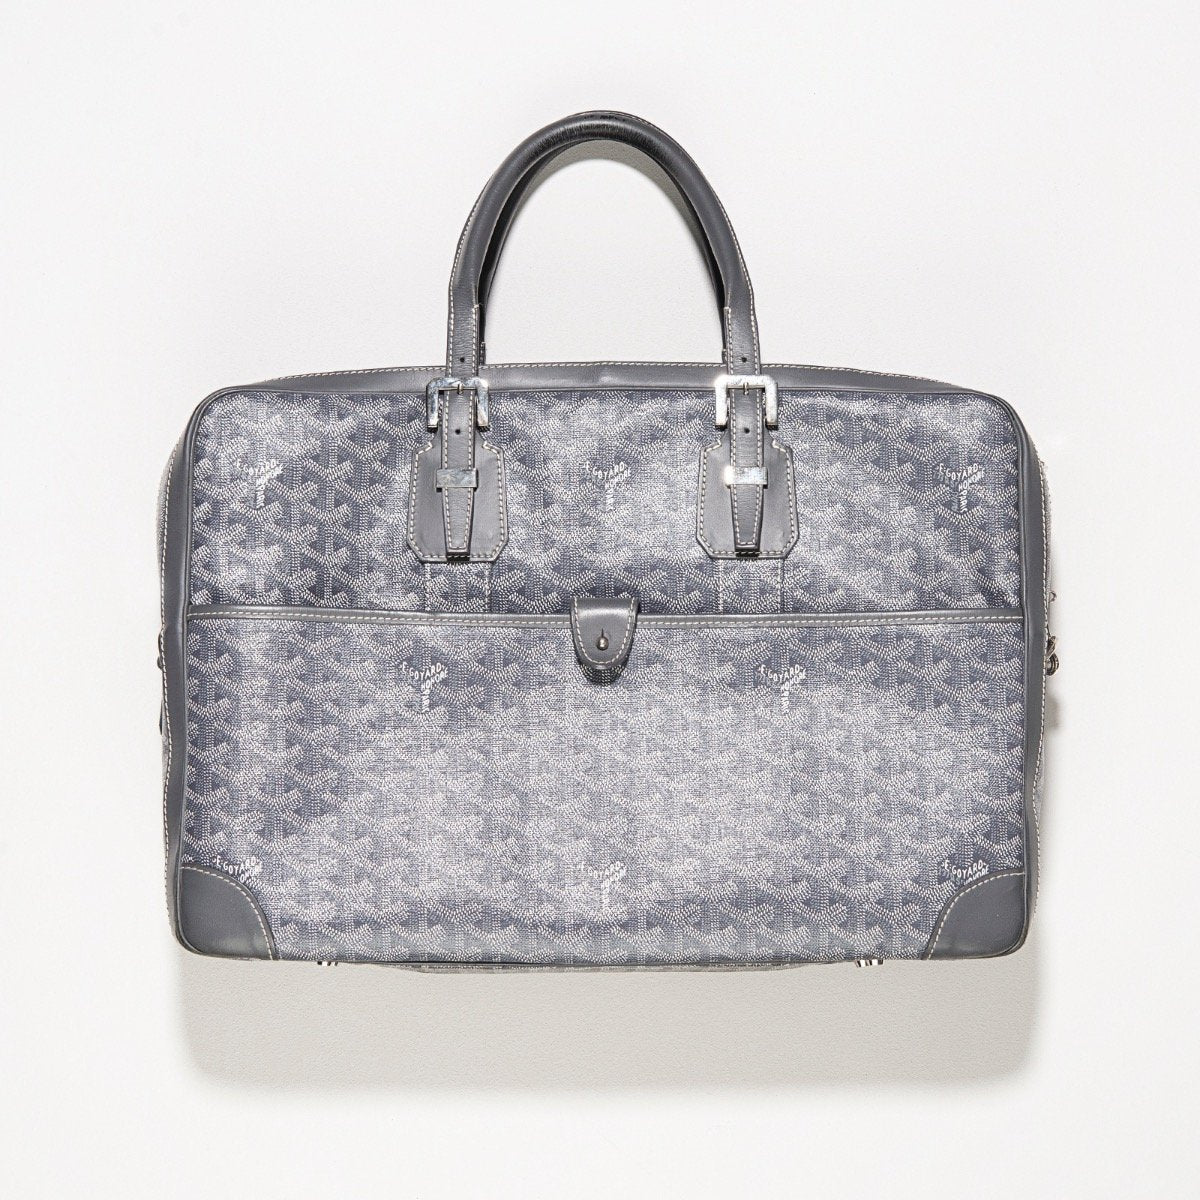 This Goyard would make a great briefcase!!!